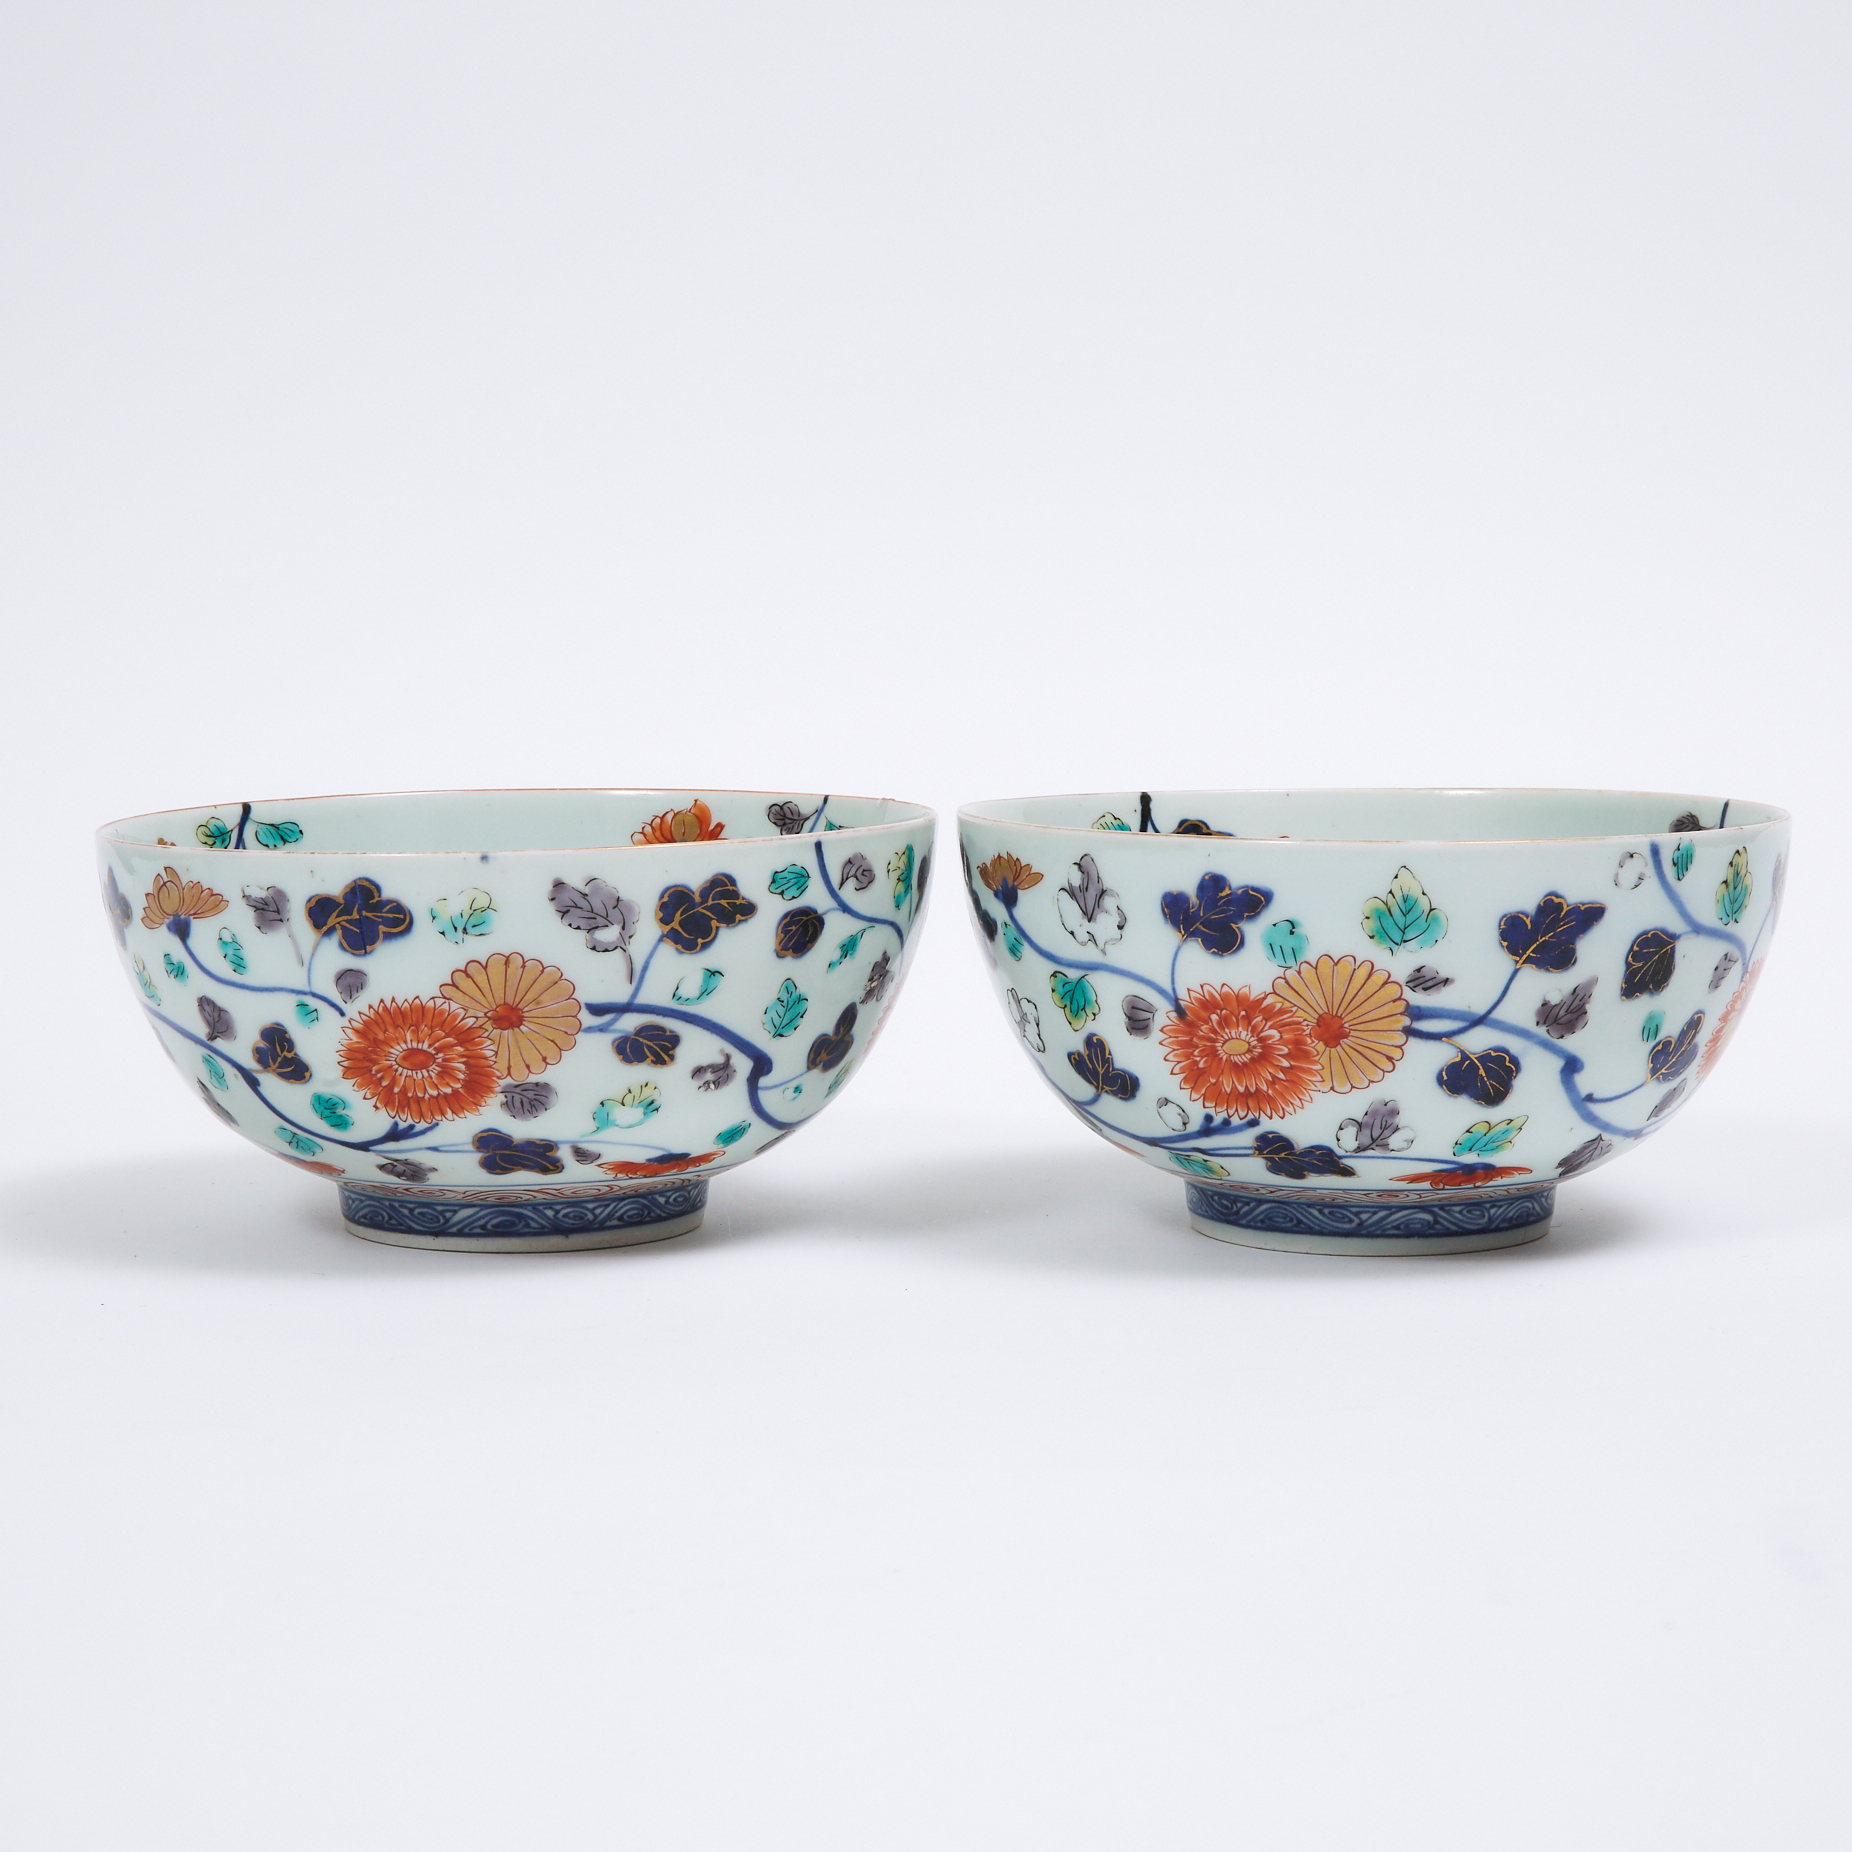 A Pair of Japanese 'Floral' Bowls, 18th Century